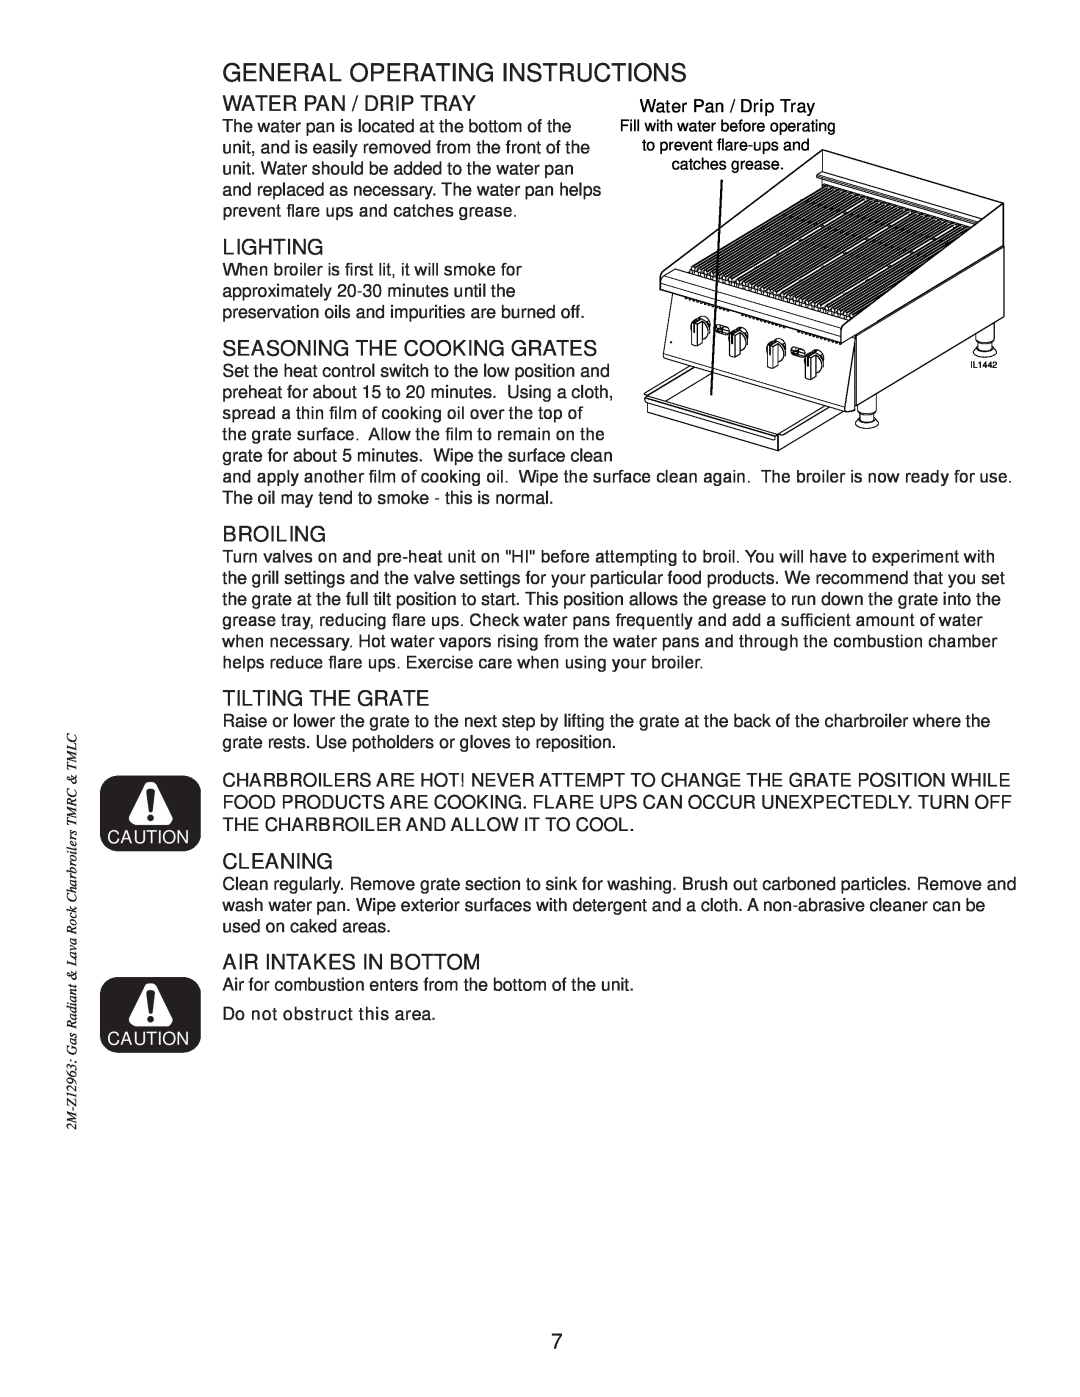 Toastmaster TMRC24 General Operating Instructions, Water Pan / Drip Tray, Lighting, Seasoning The Cooking Grates, Broiling 